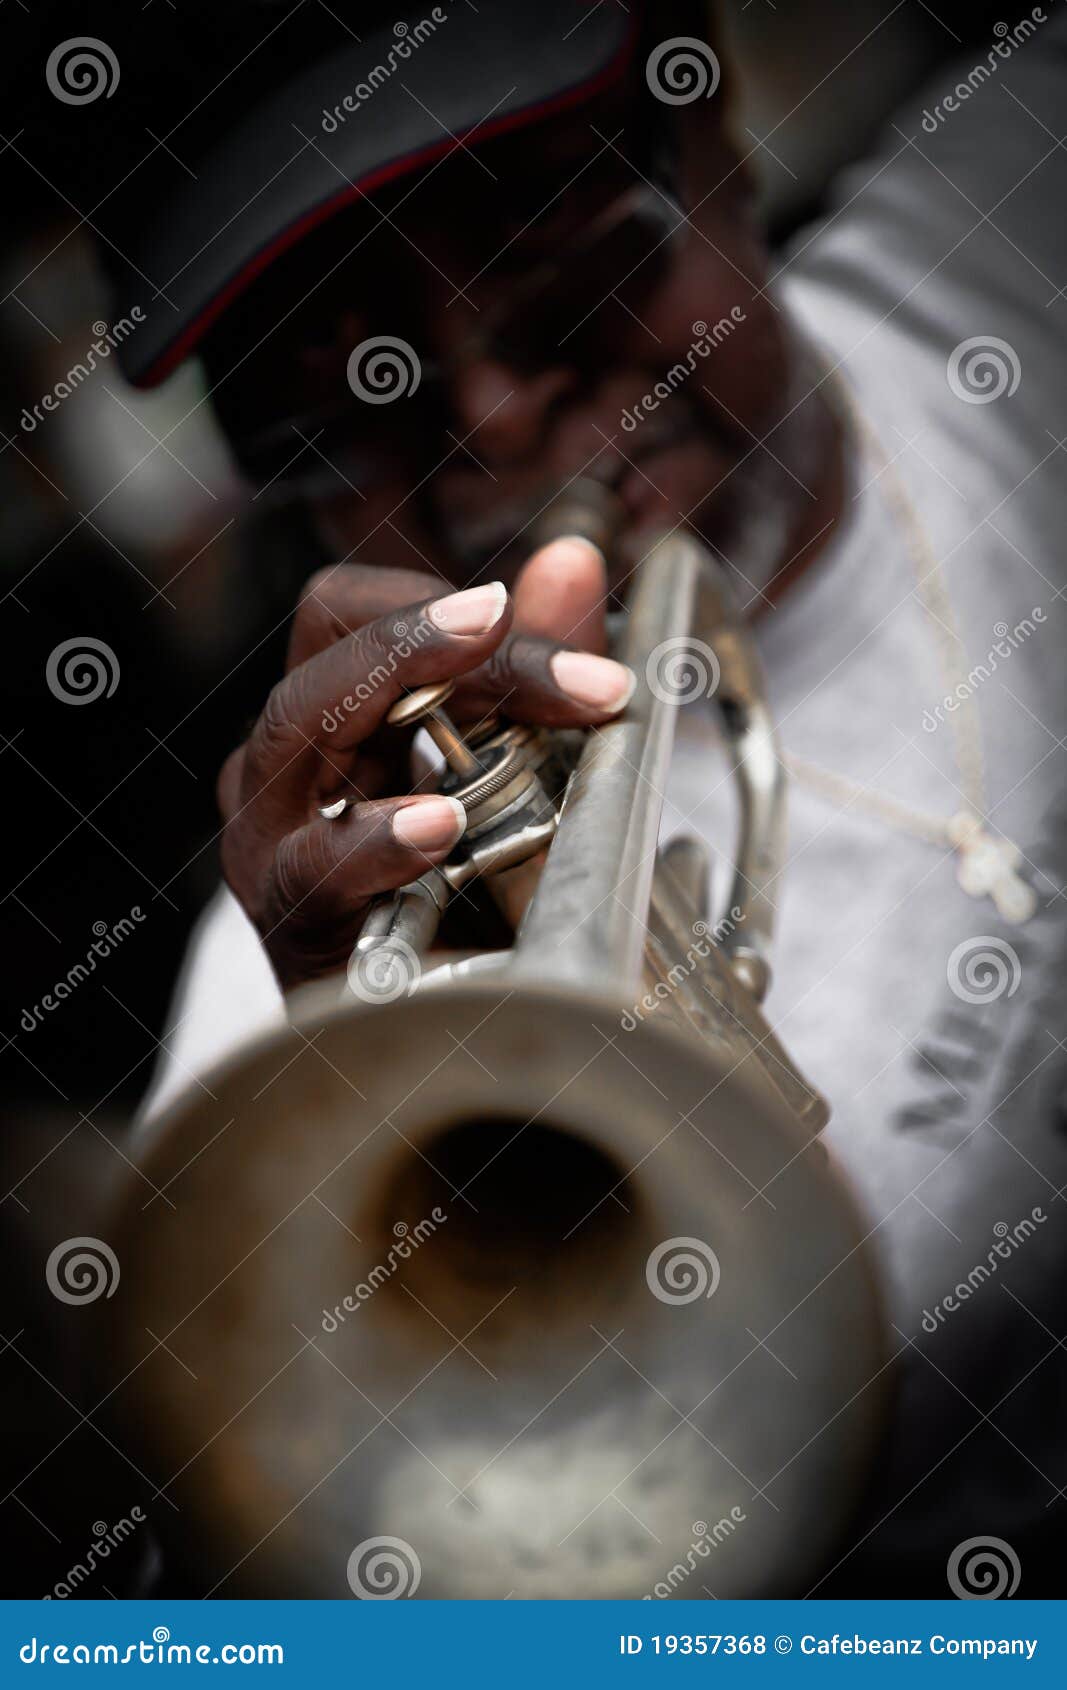 New Orleans - Street Musician Editorial Stock Photo - Image of ...